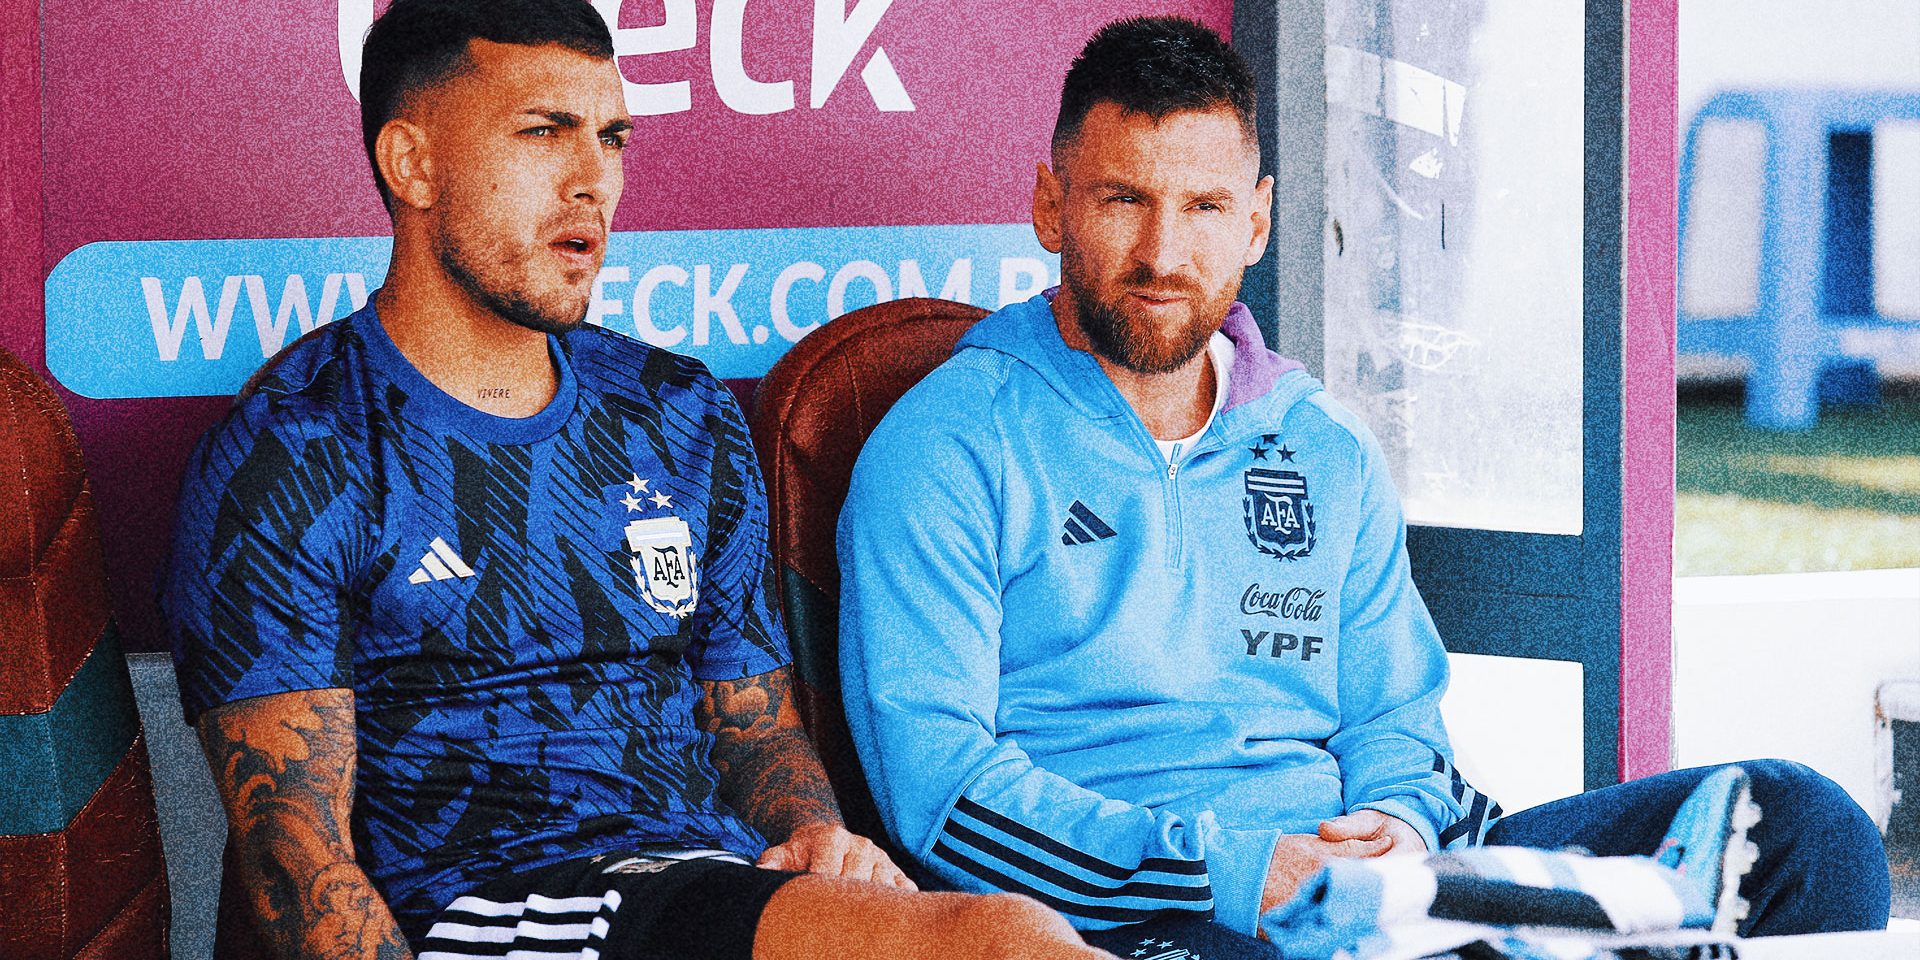 Lionel Messi sits out of Argentina's World Cup qualifying match at Bolivia